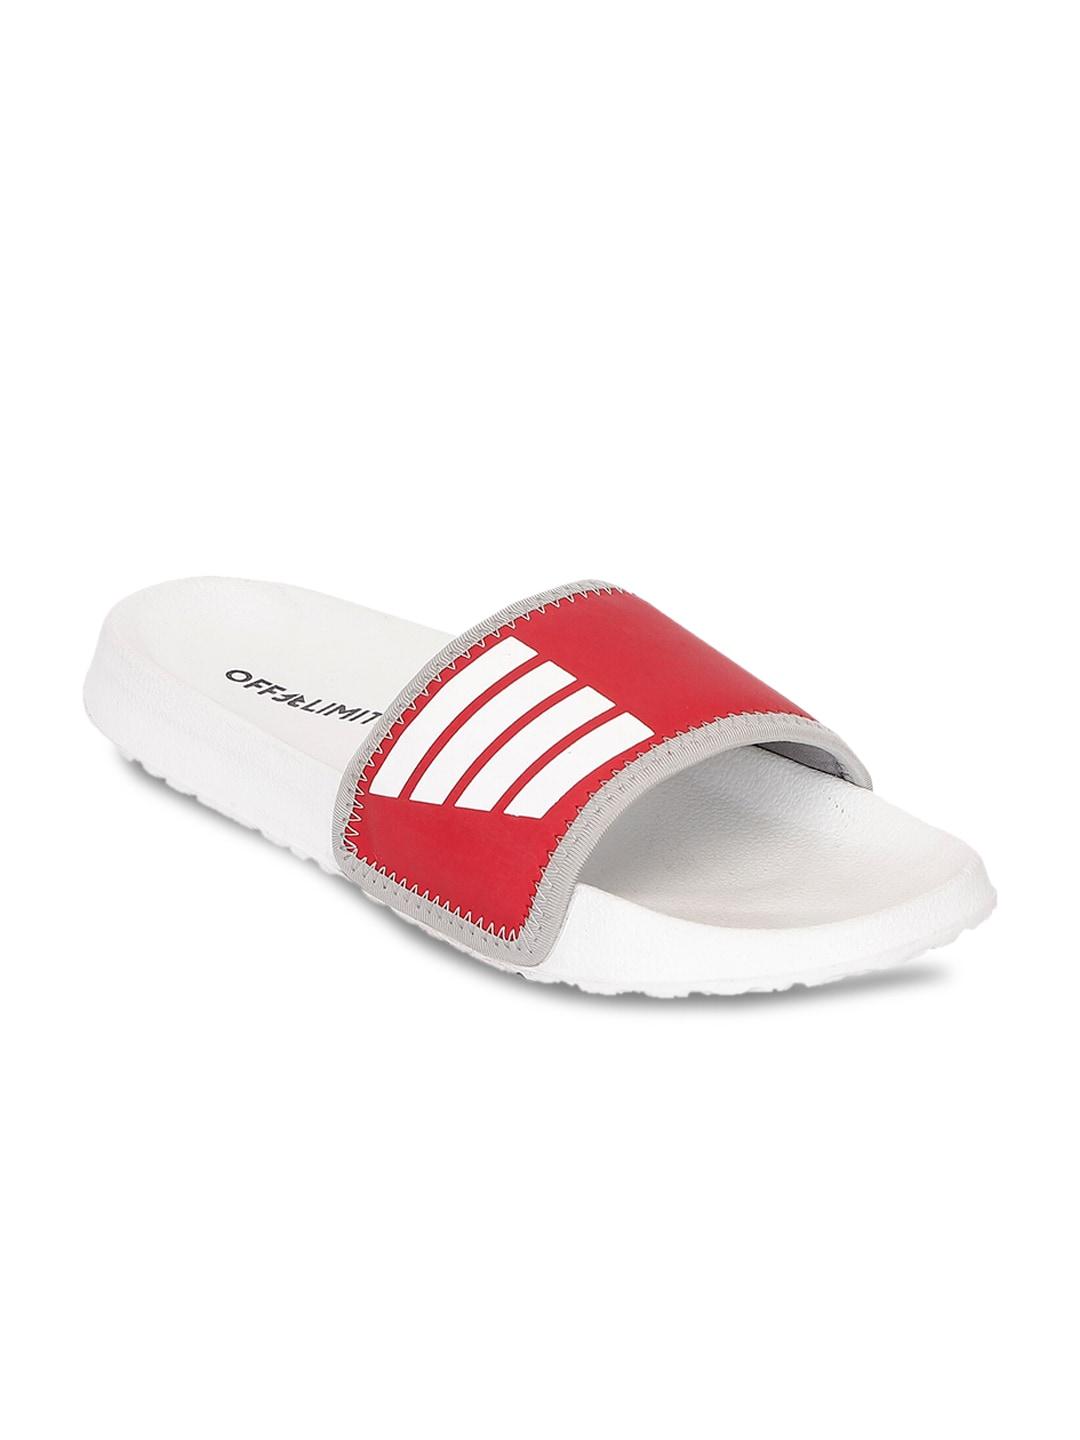 off-limits-women-red-&-white-striped-sliders